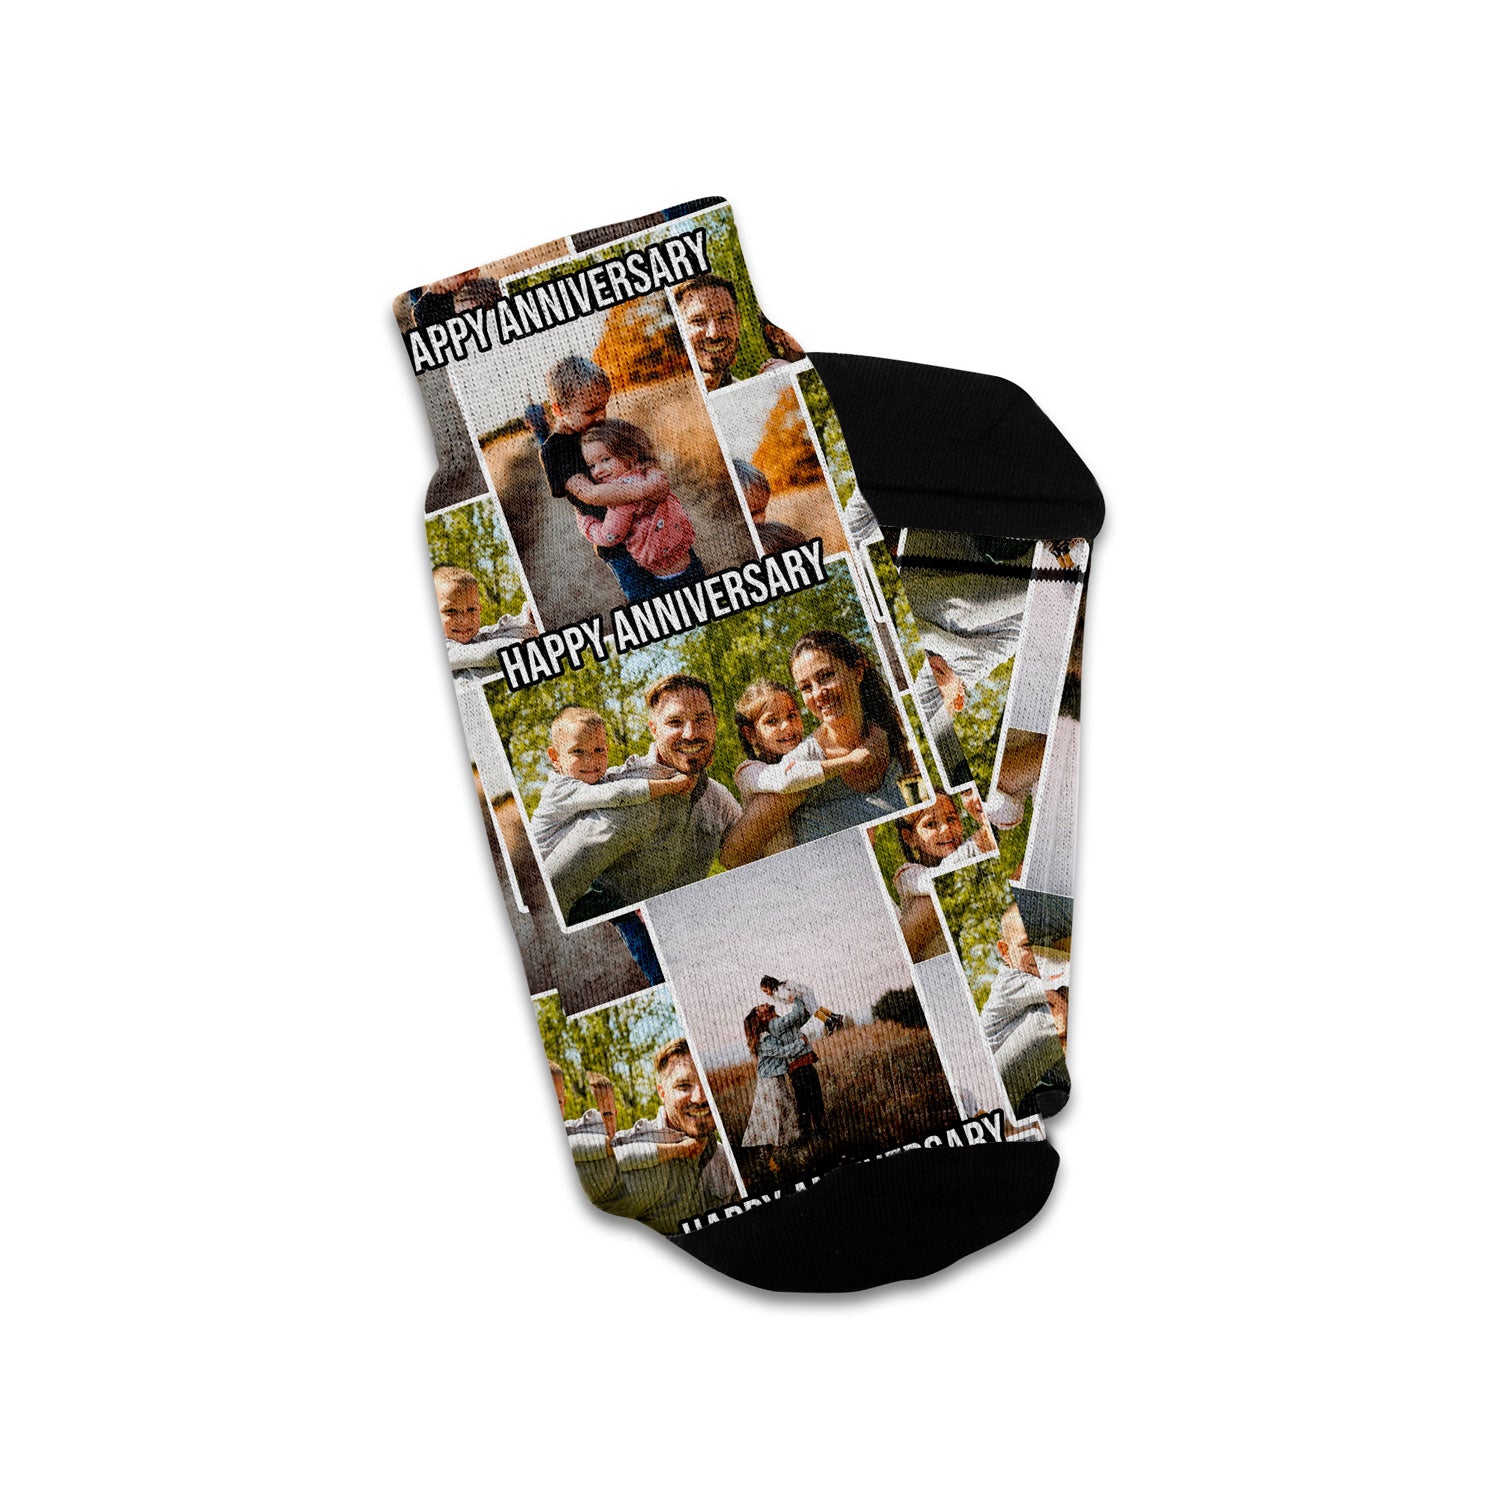 personalized photo collage gift socks with text